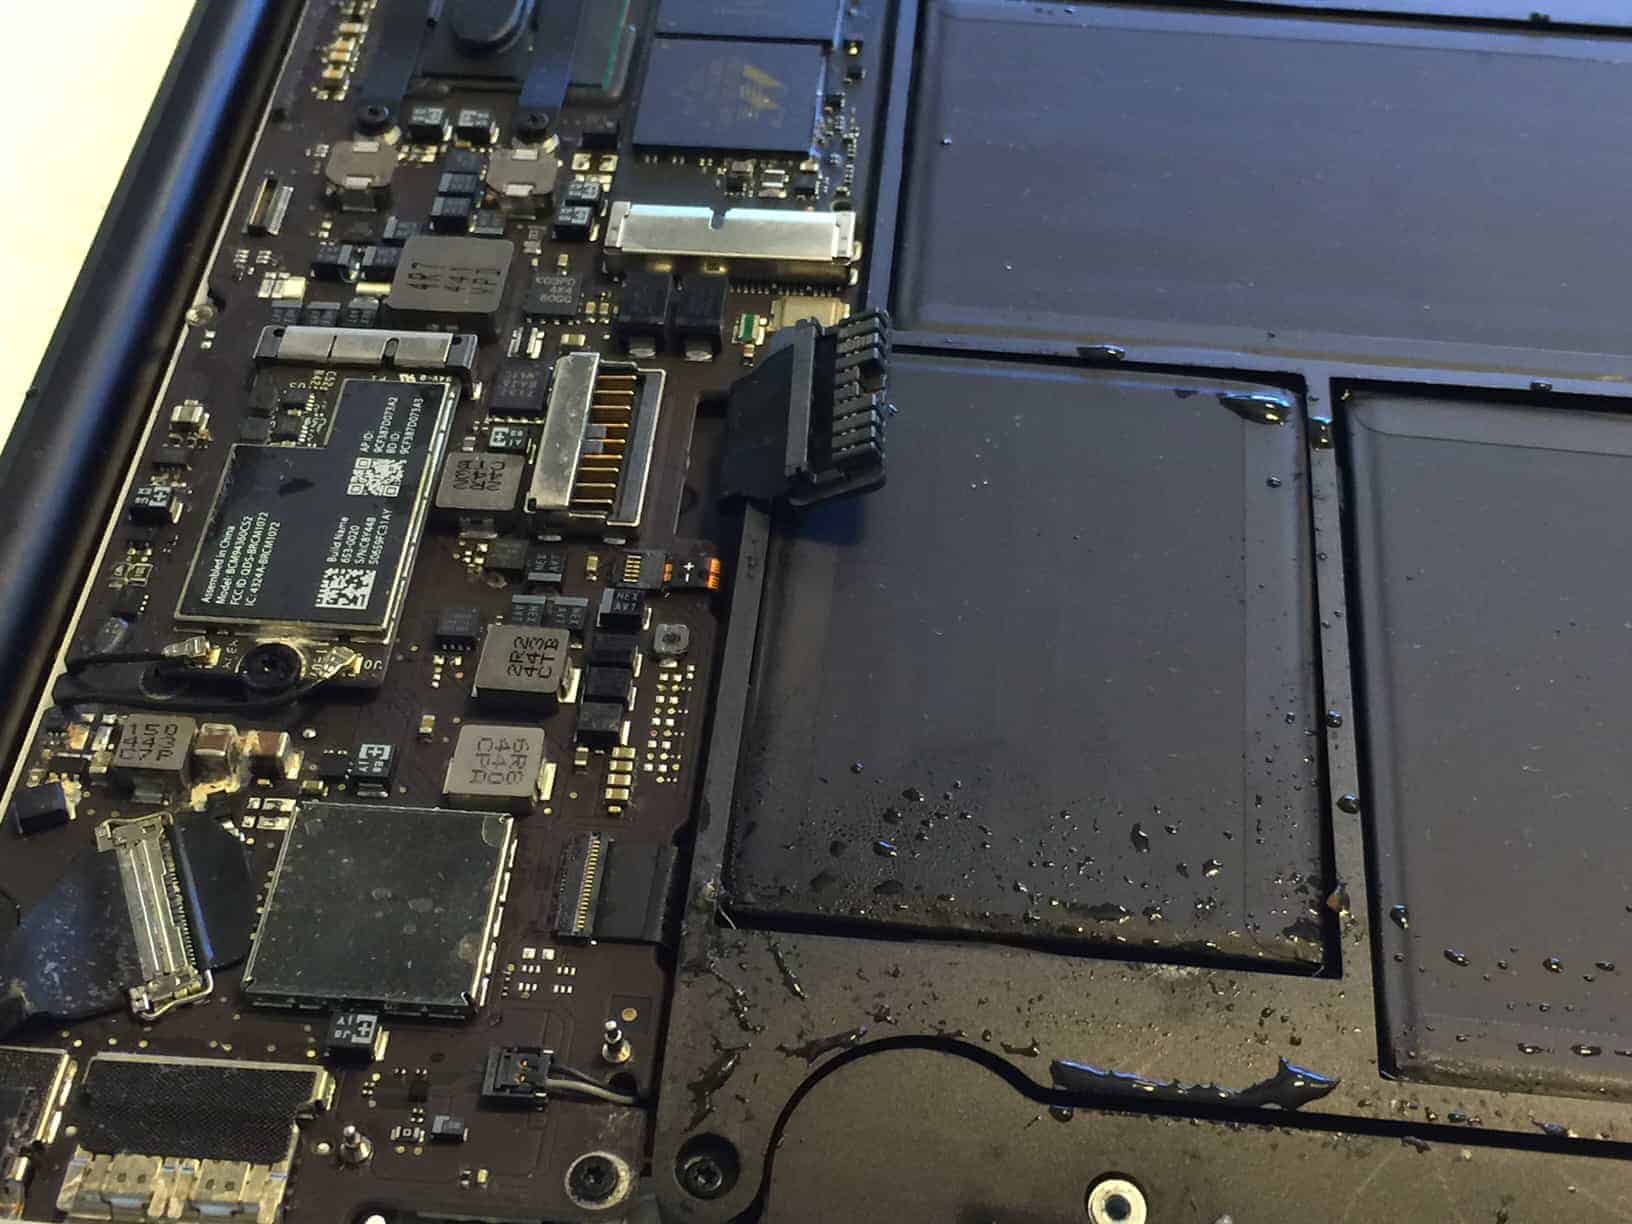 Inside of MacBook Air with water droplets